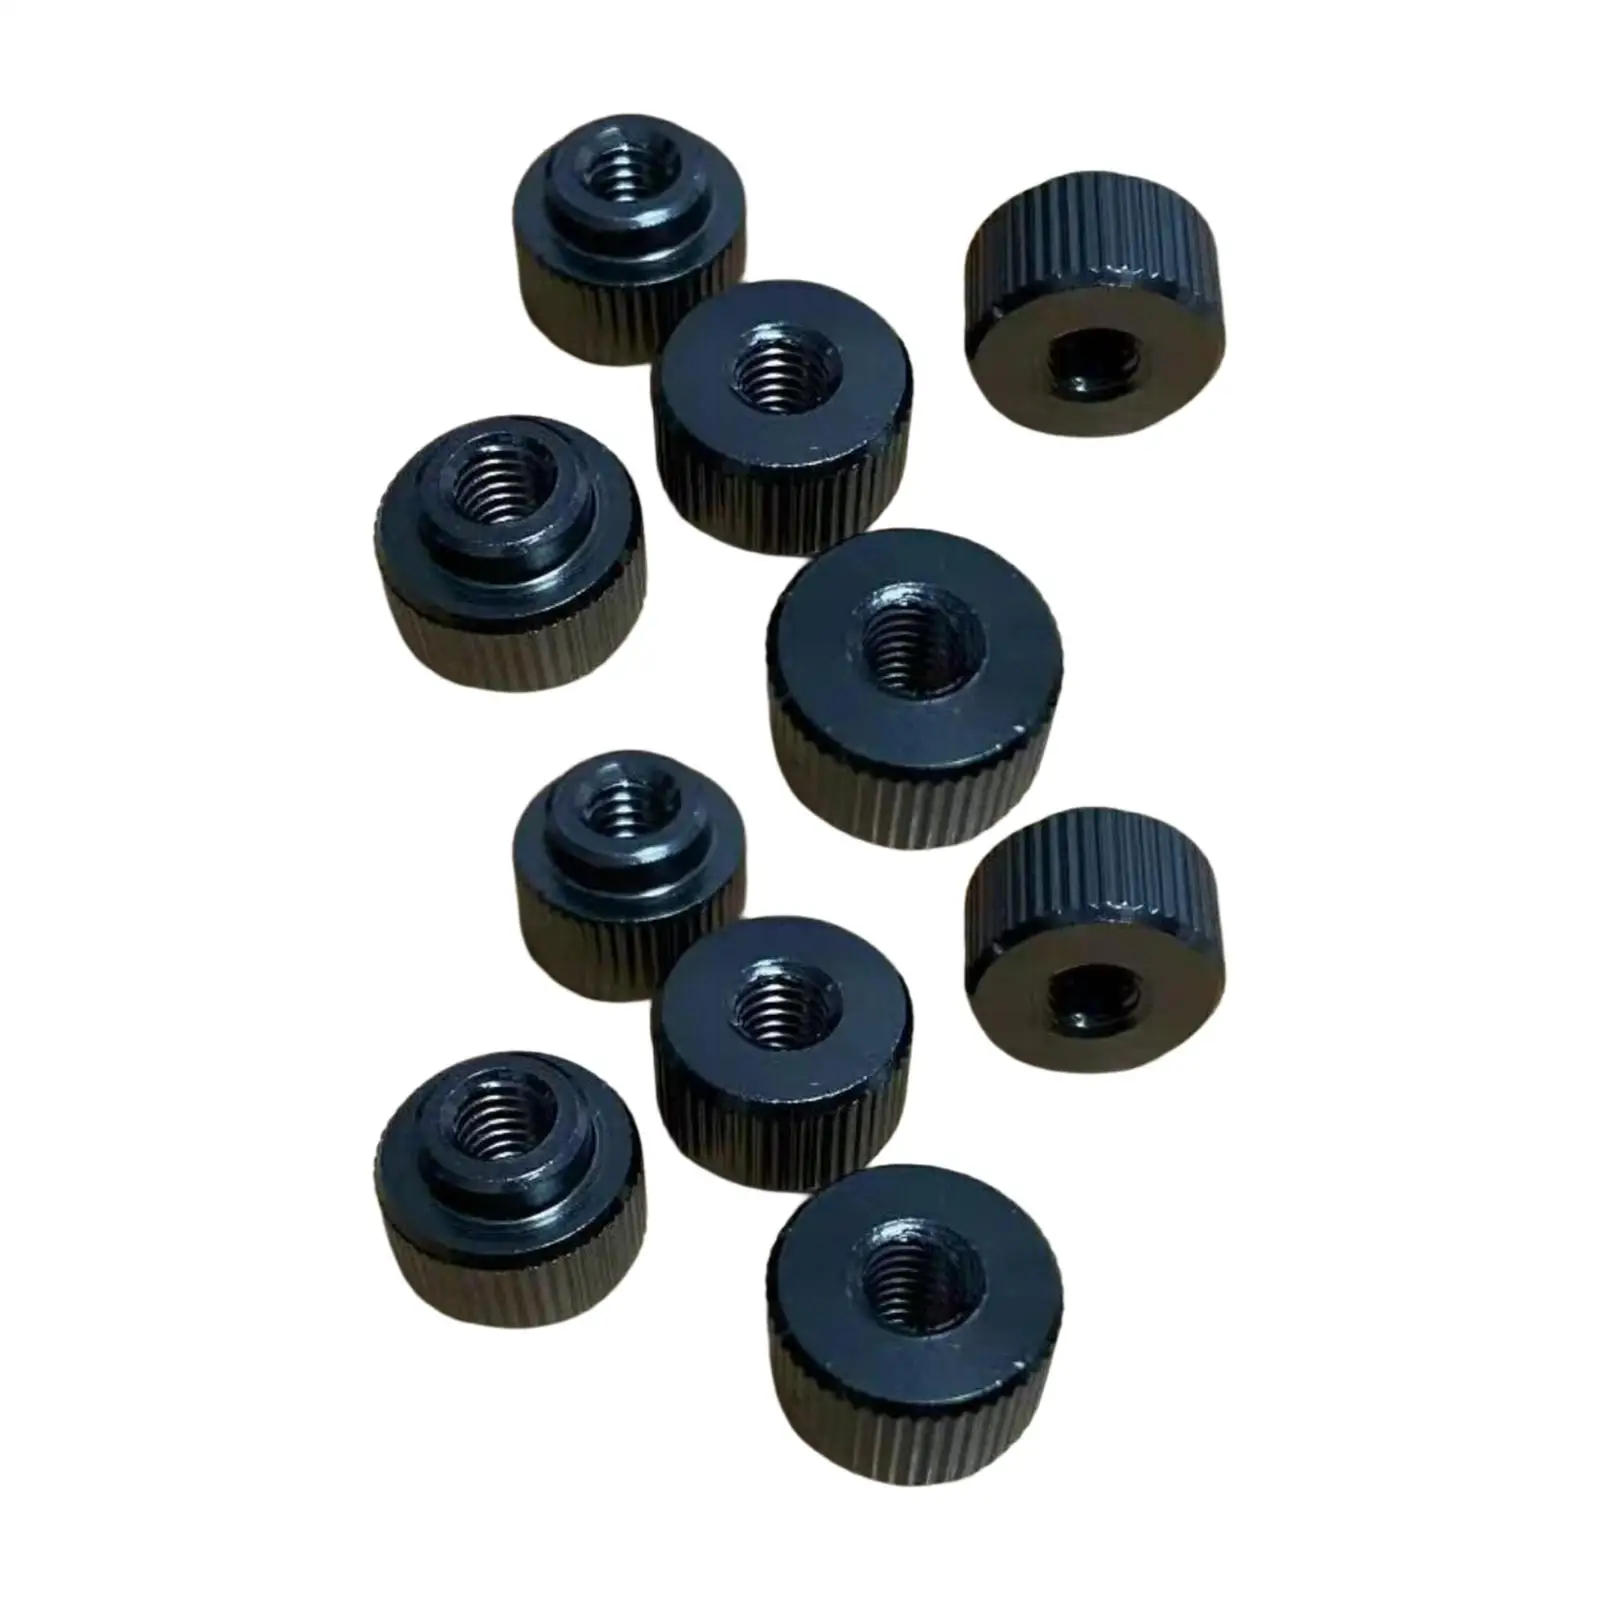 

10x Drum Screw Nuts for 7/32" Screws Assembly Supplies Universal Easily Install